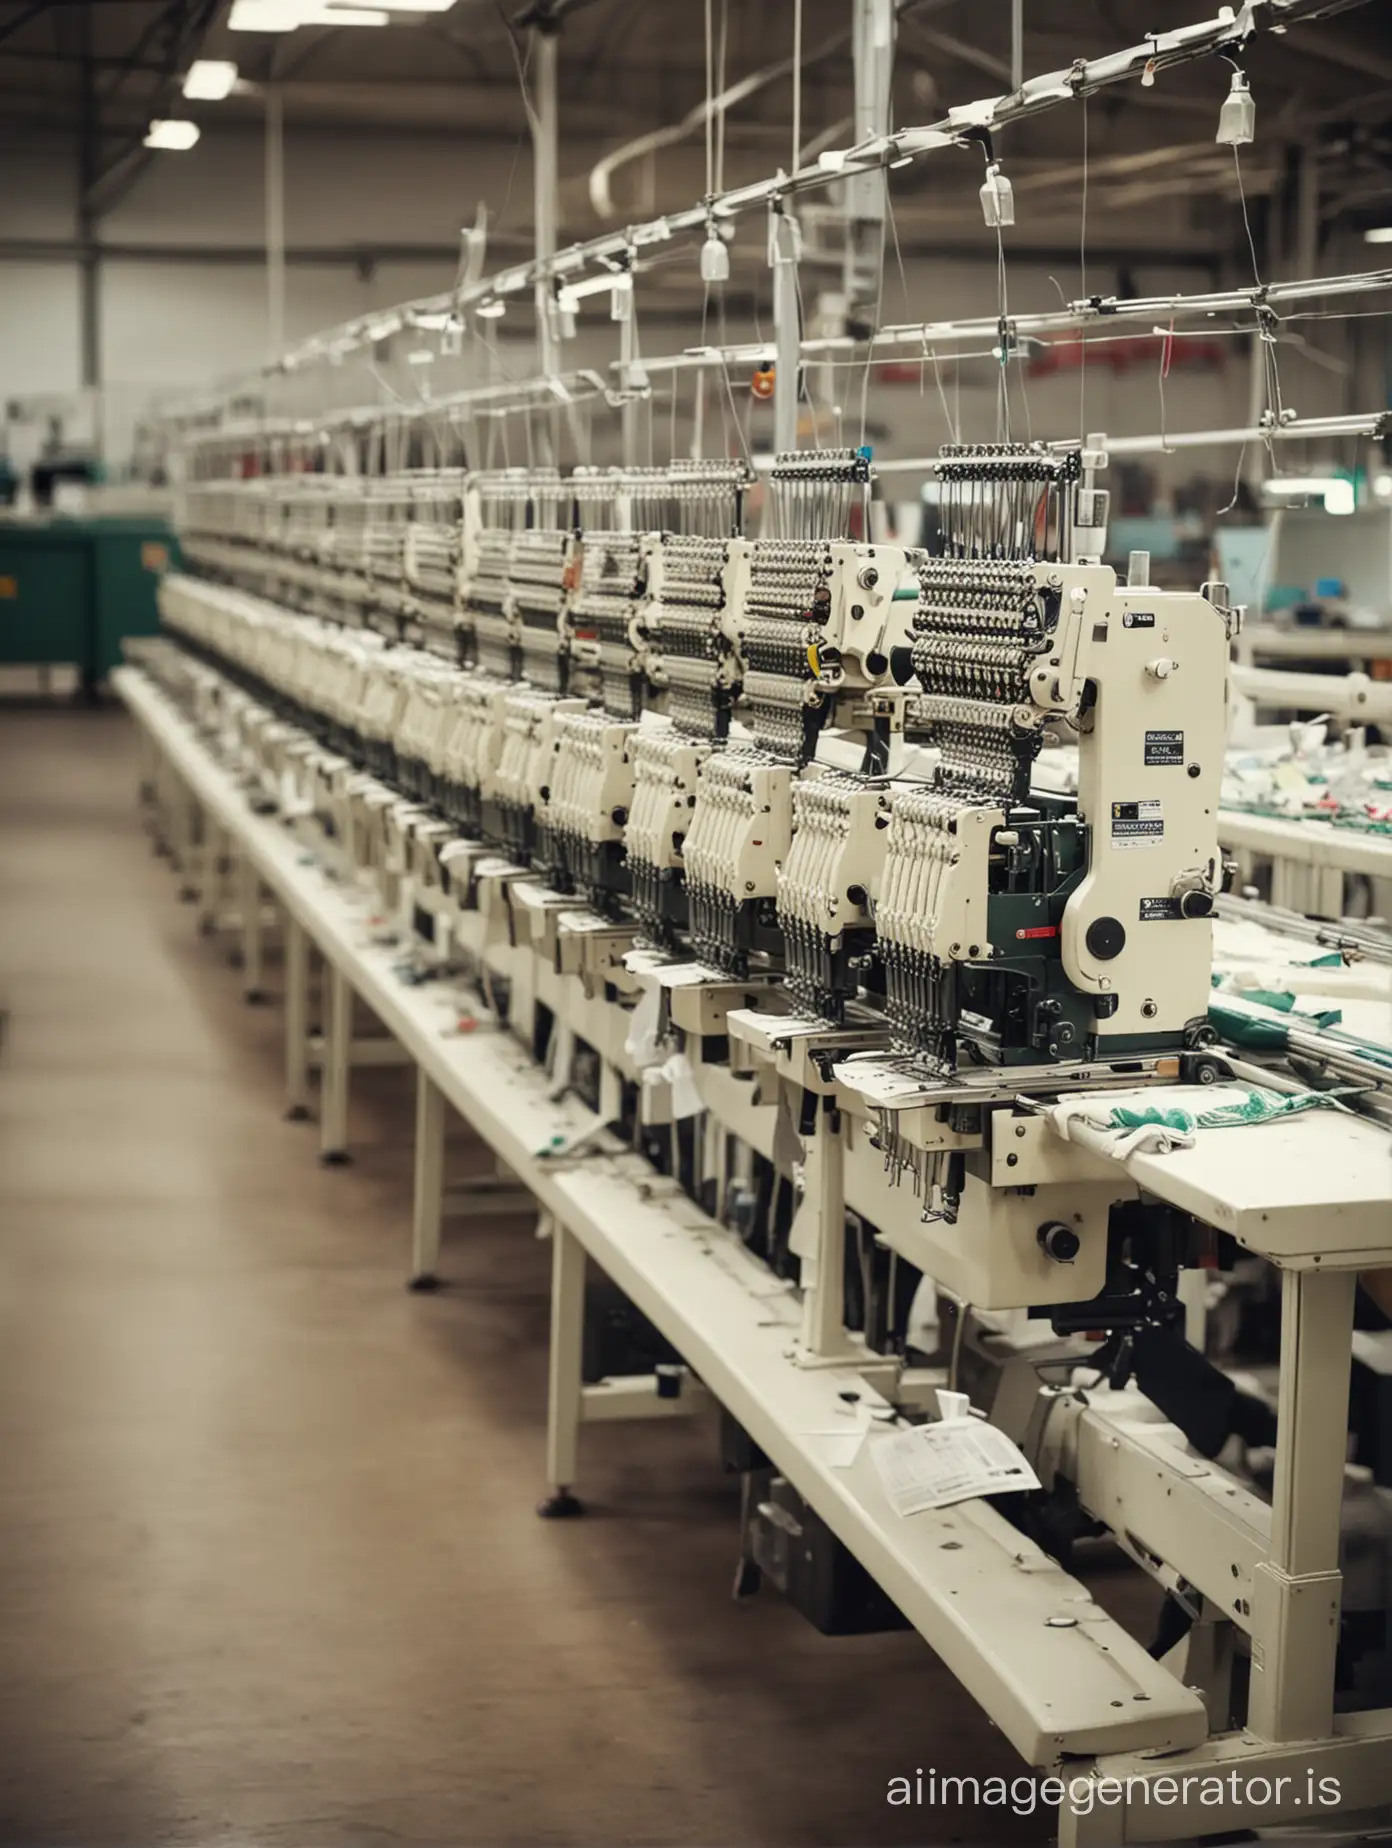 VintageStyle-German-Factory-with-Industrial-Embroidery-Machines